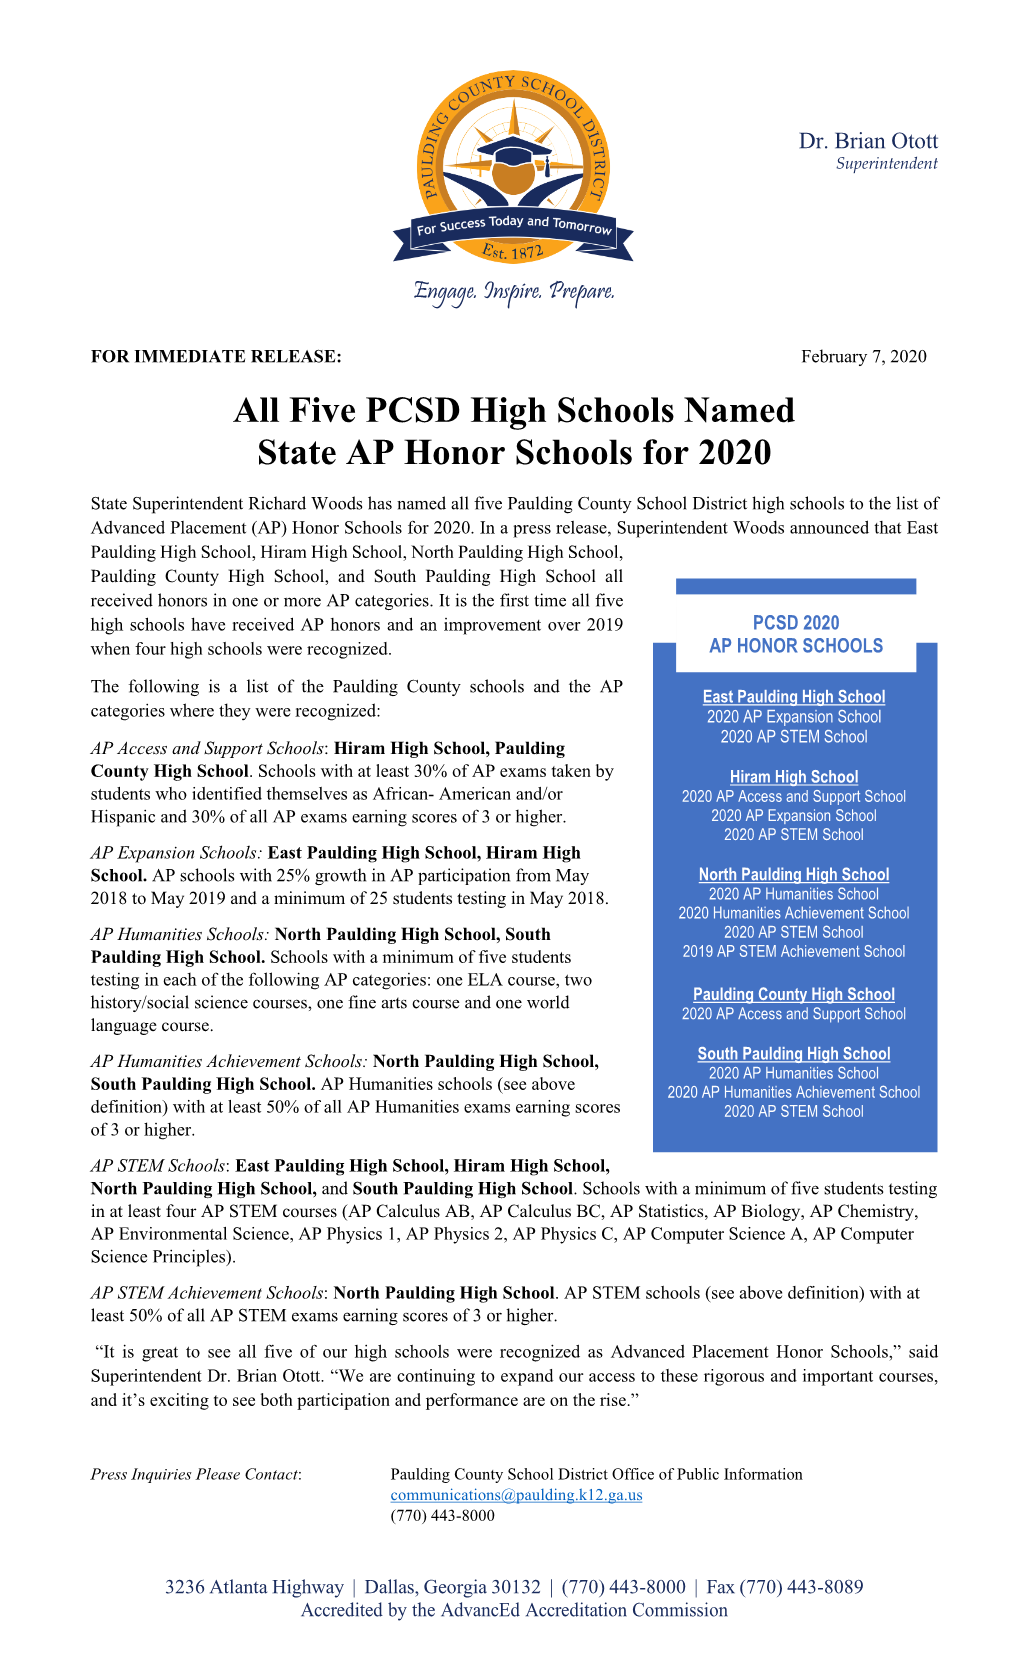 Five PCSD High Schools Named State AP Honor Schools for 2020